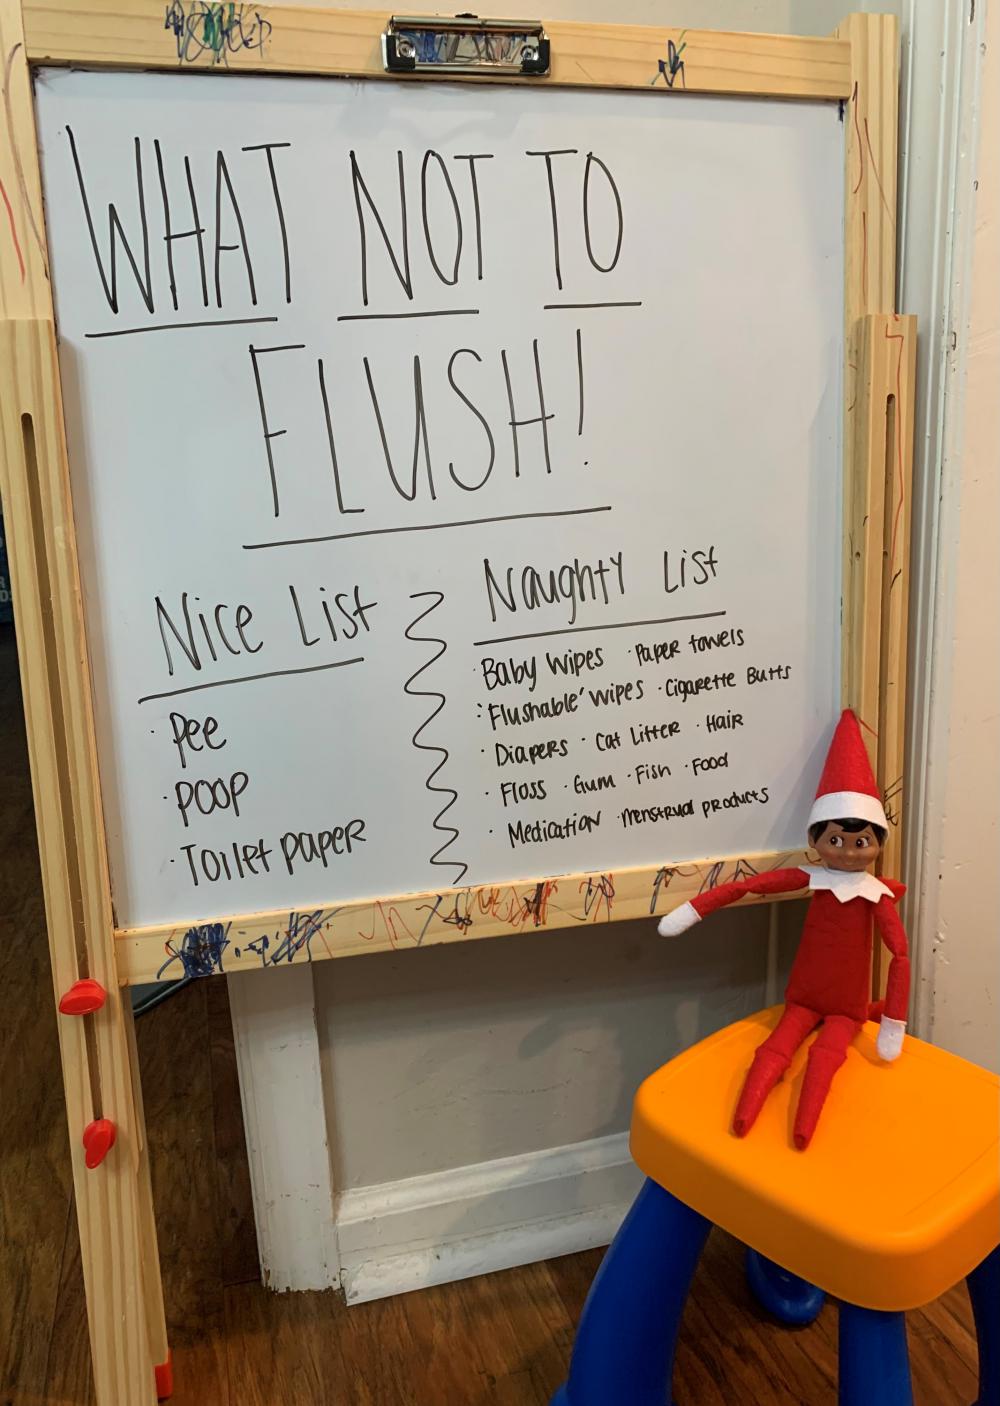 what not to flush - whiteboard